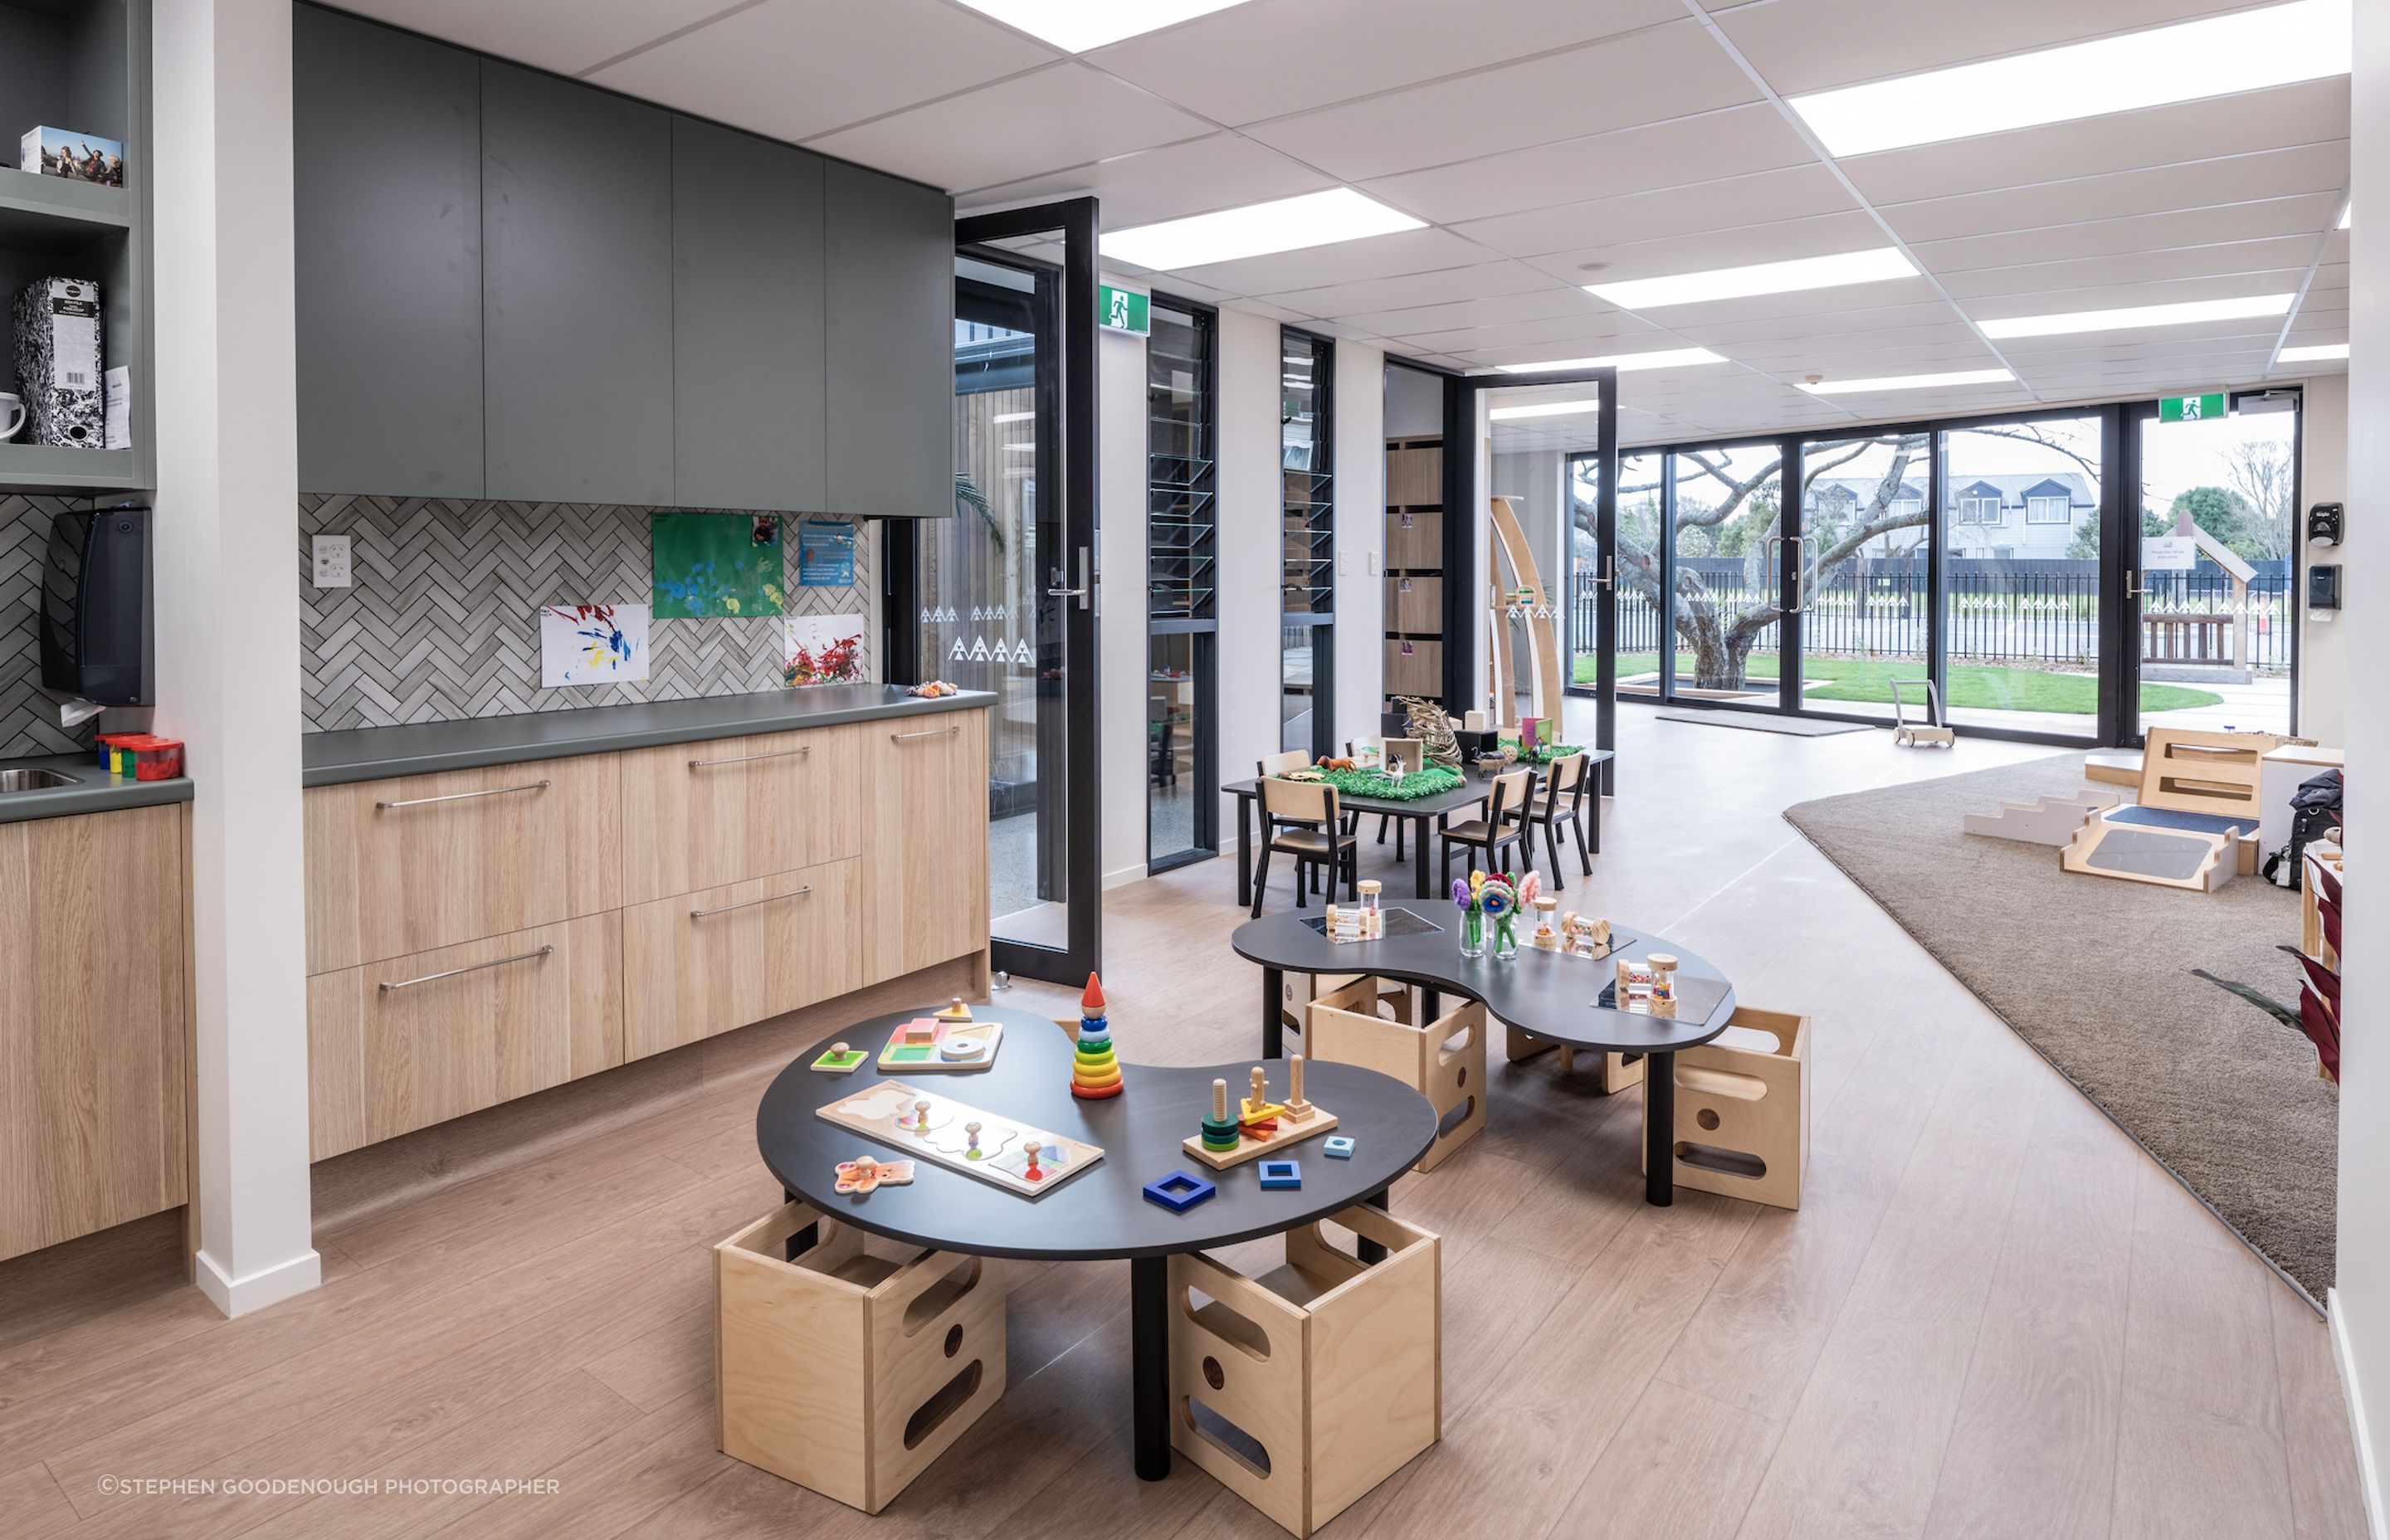 The client imagined a one-of-a-kind space that hosts a connection with nature first and foremost, presenting a raw environment filled with opportunities for sensory-rich play.